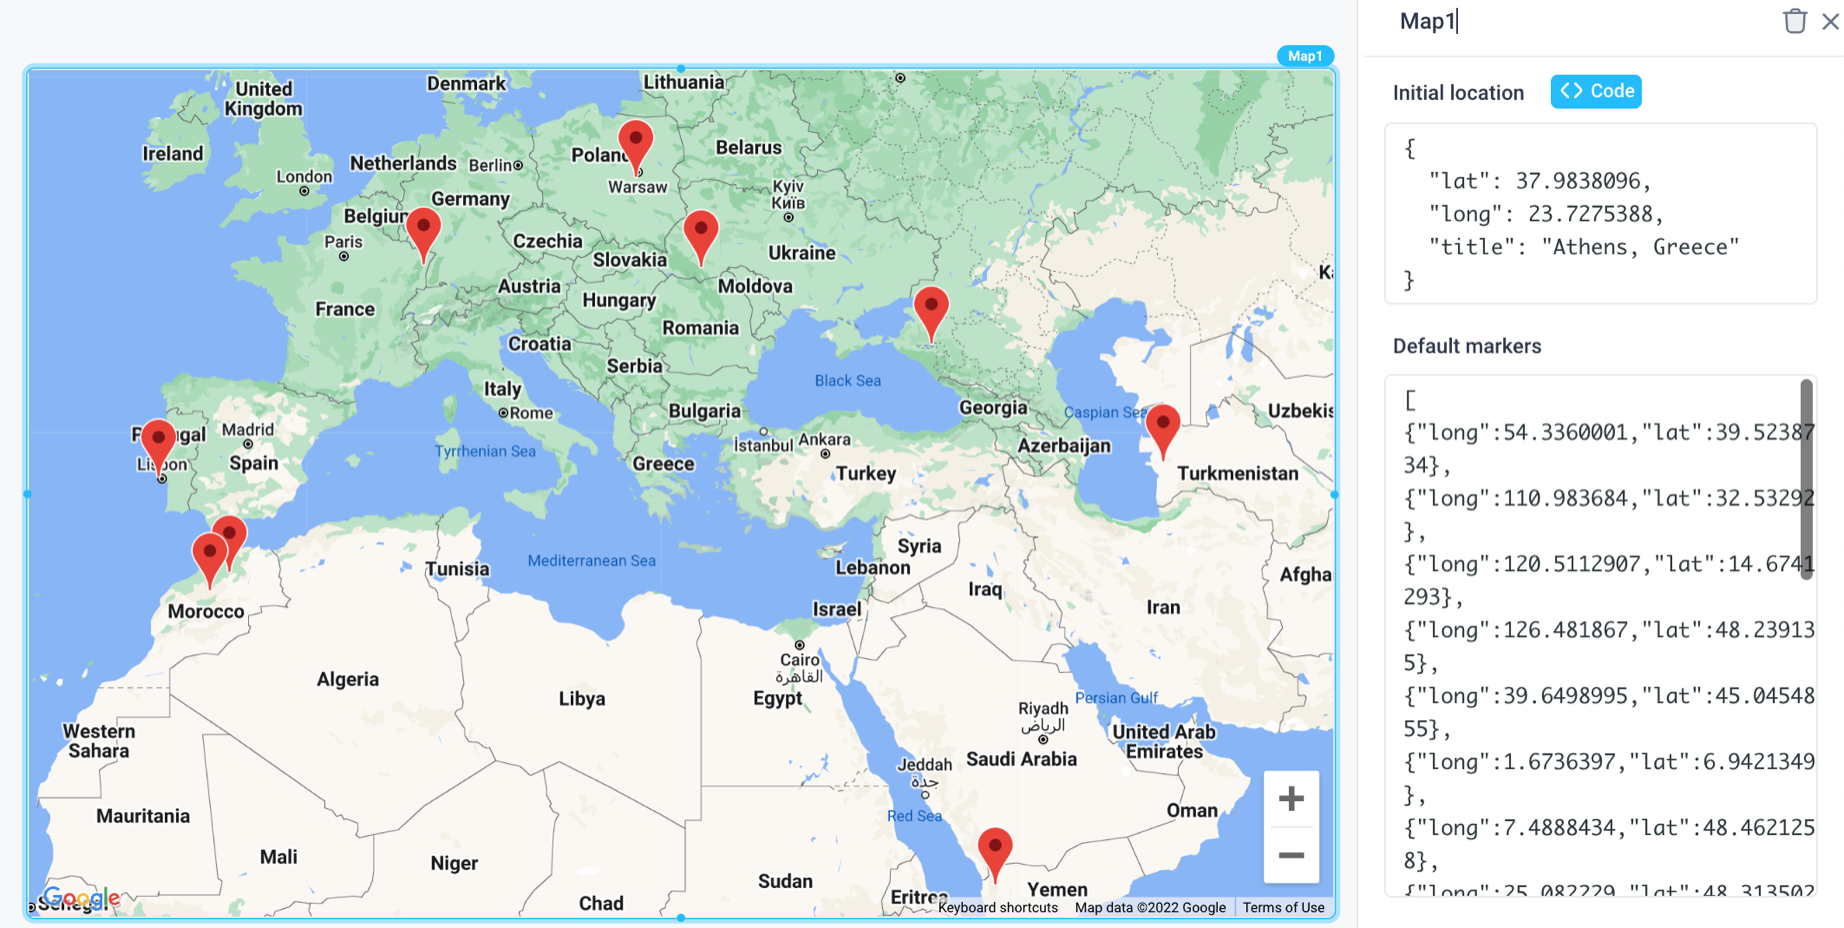 Add markers to a map using an object containing latitude, longitude, and an optional title